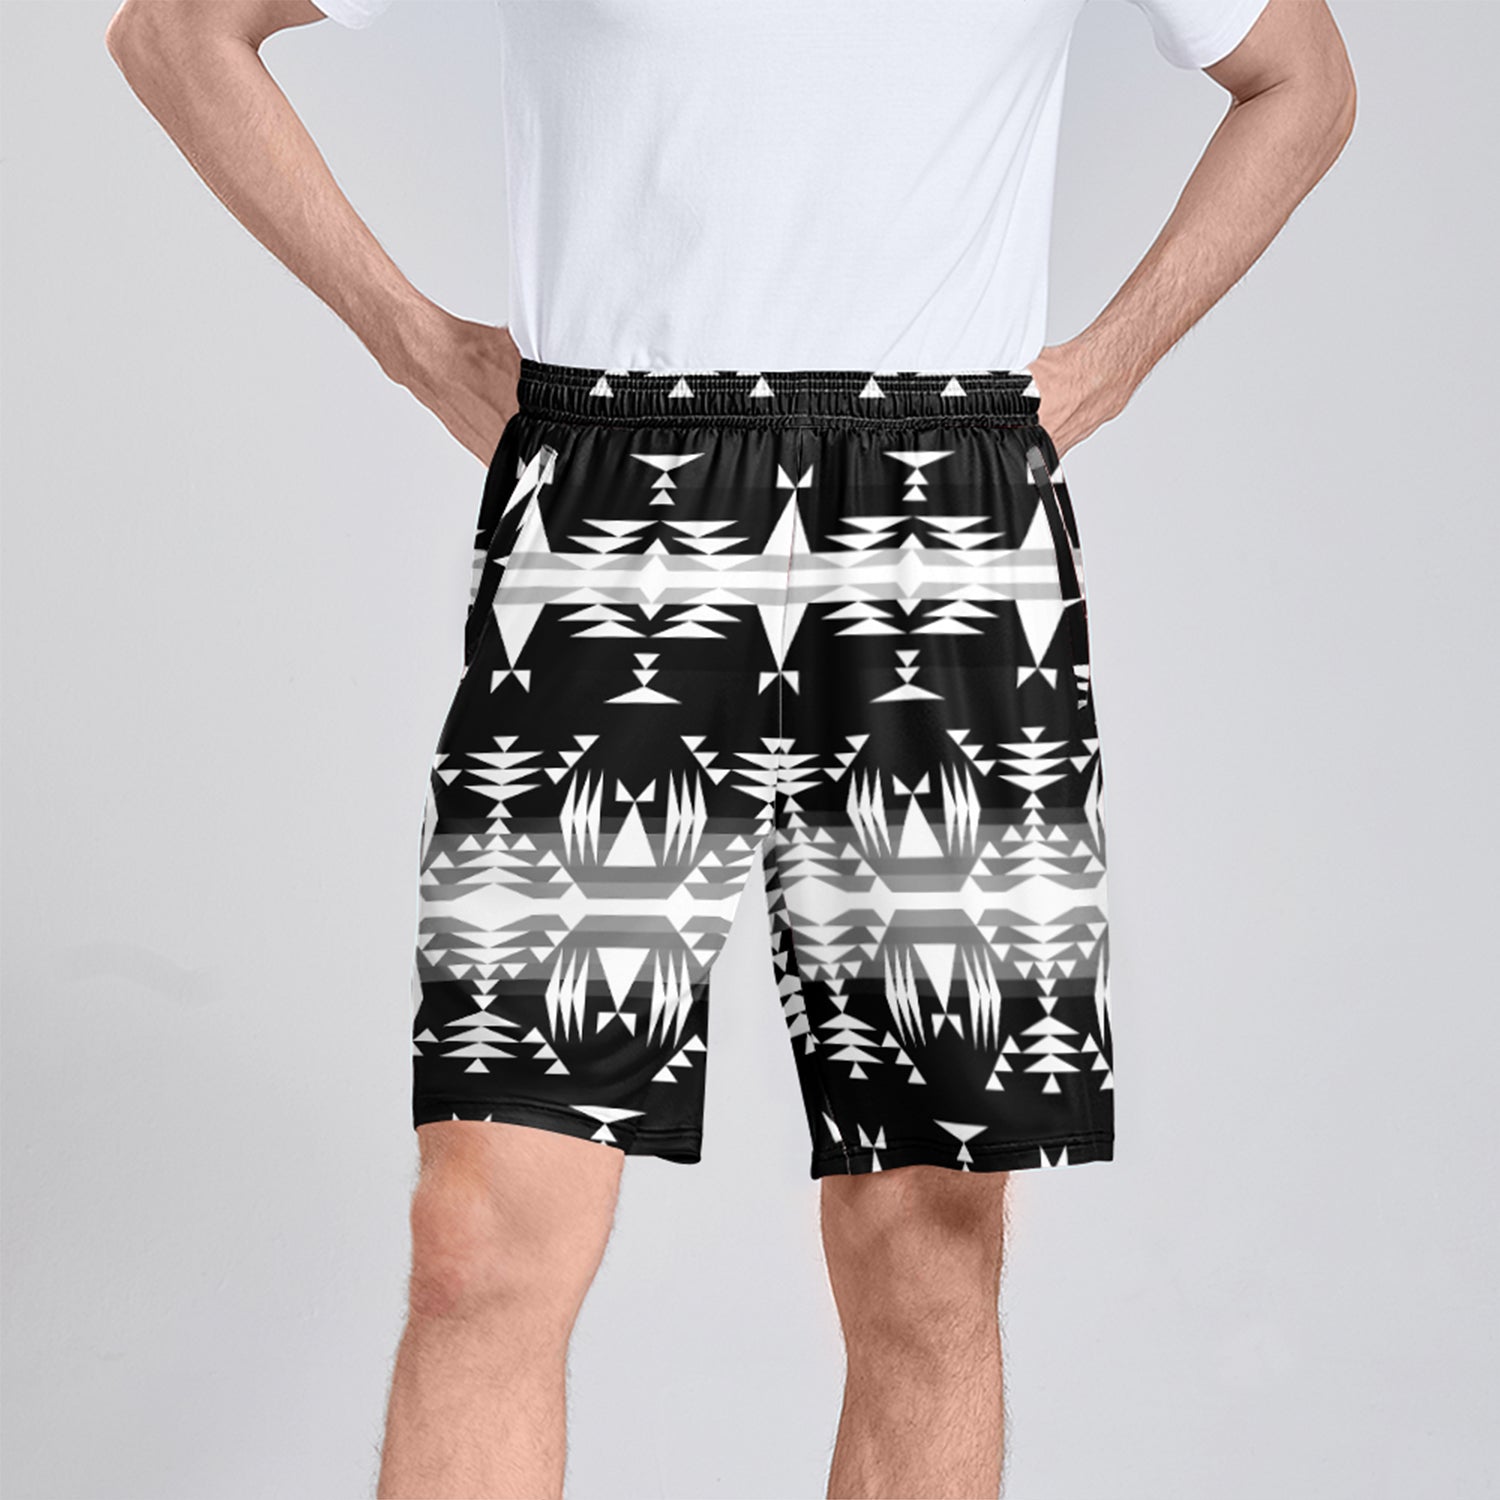 Between the Mountains Black and White Athletic Shorts with Pockets